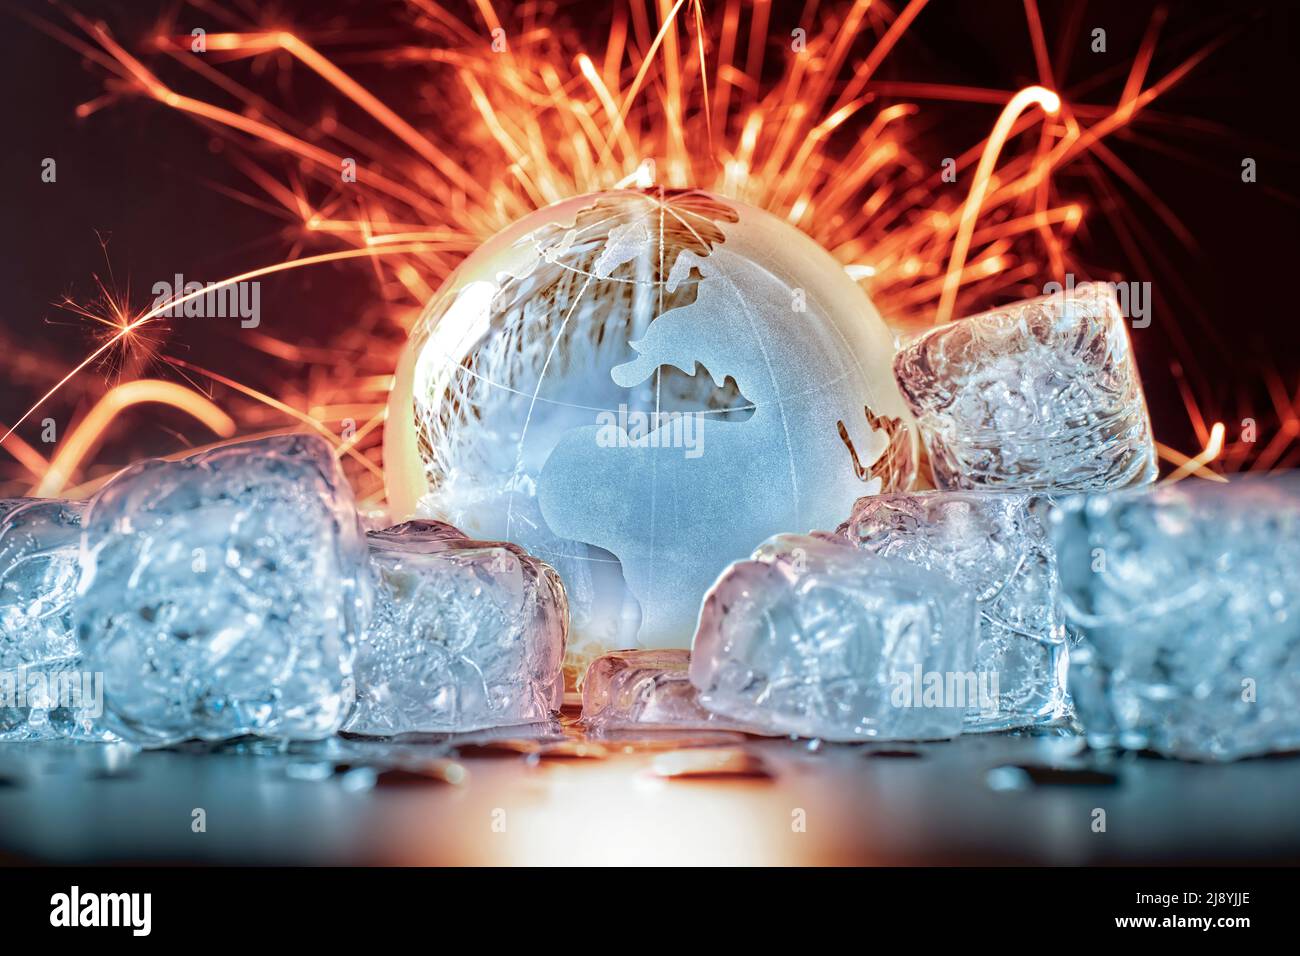 Globe with ice cubes and glow with sparks in background Stock Photo